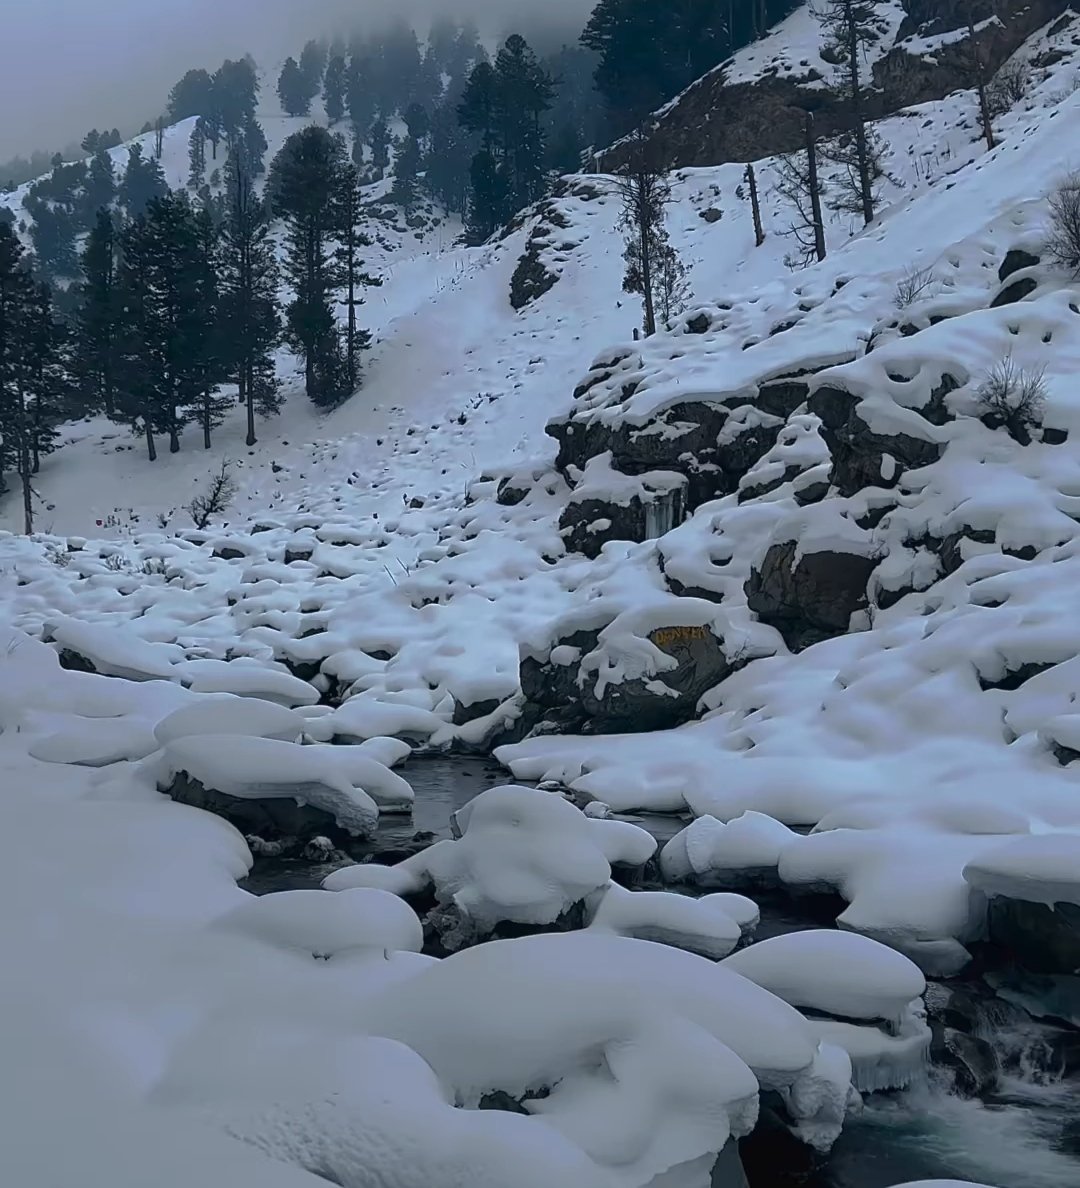 Beautiful kashmir in winters . 
#araidstraveltrips #snow #kashmir #mountains #beautybloggers #photographer #photography #pine #stream #naturephotography #awesome